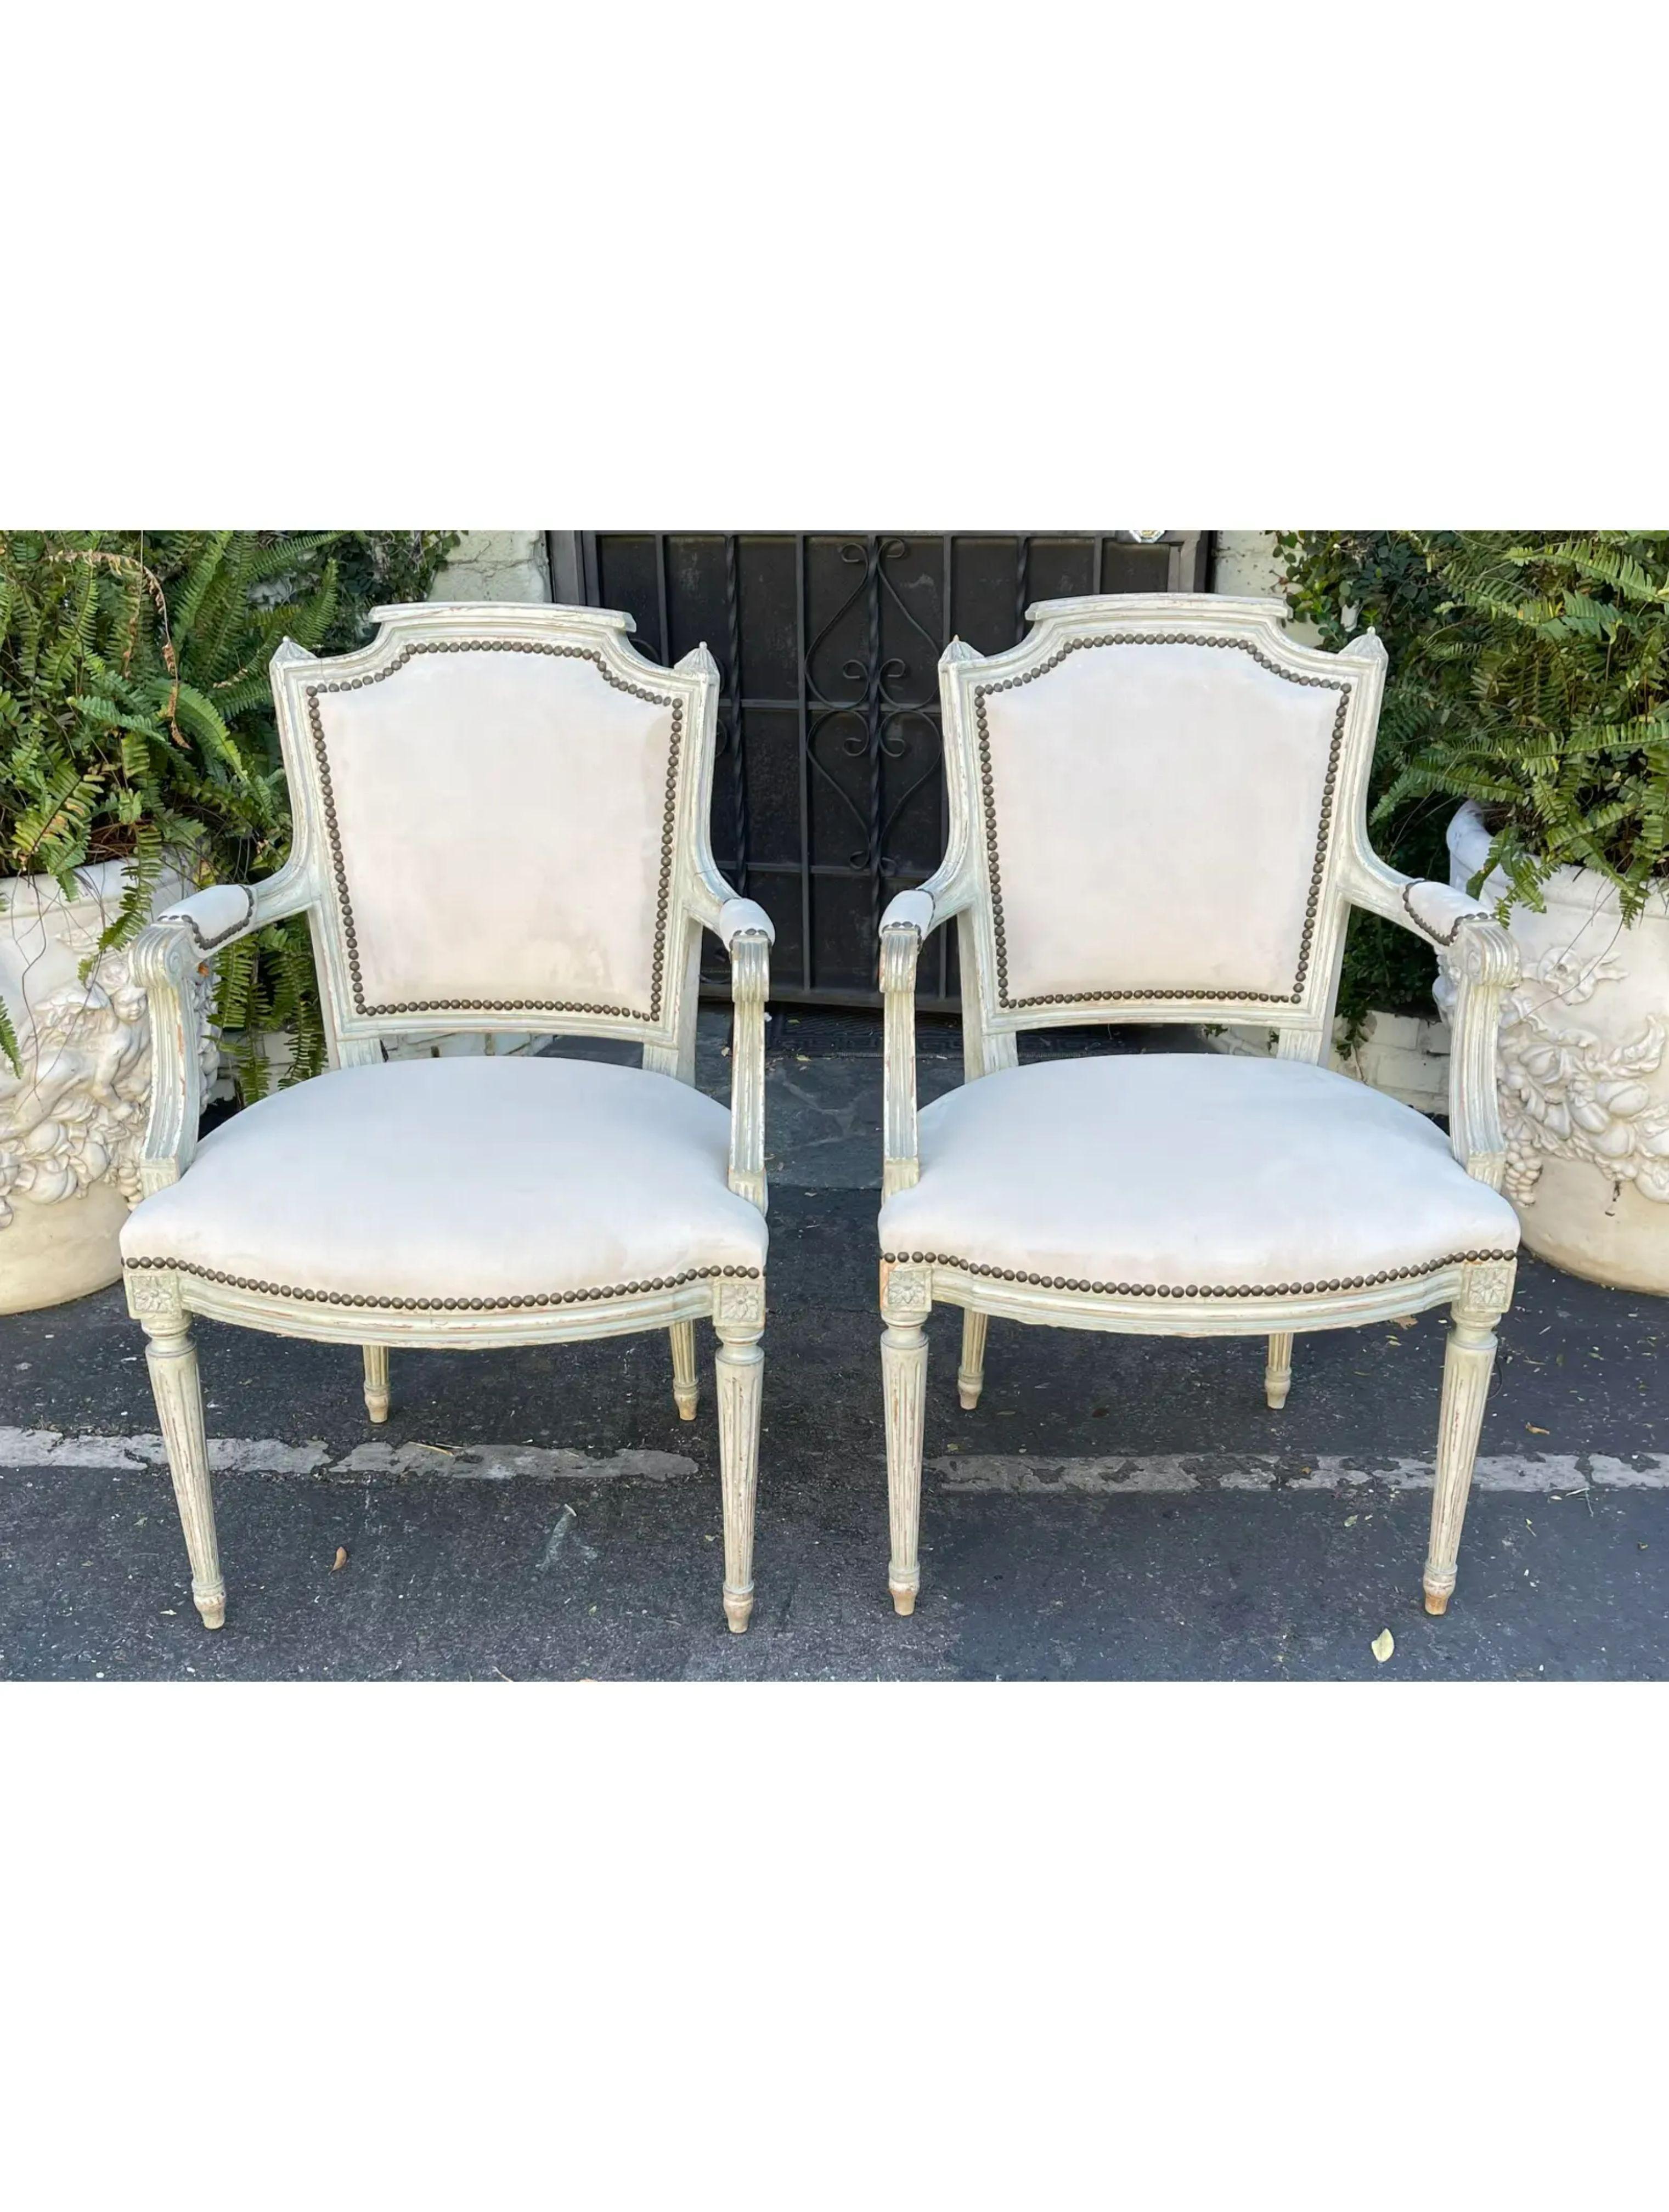 Antique Louis XVI style Maison Jansen Arm chairs - a pair
Freshly upholstered.

Additional information: 
Materials: Velvet, Wood
Color: Greige
Brand: Maison Jansen
Designer: Maison Jansen
Period: Early 20th century
Styles: Louis XVI